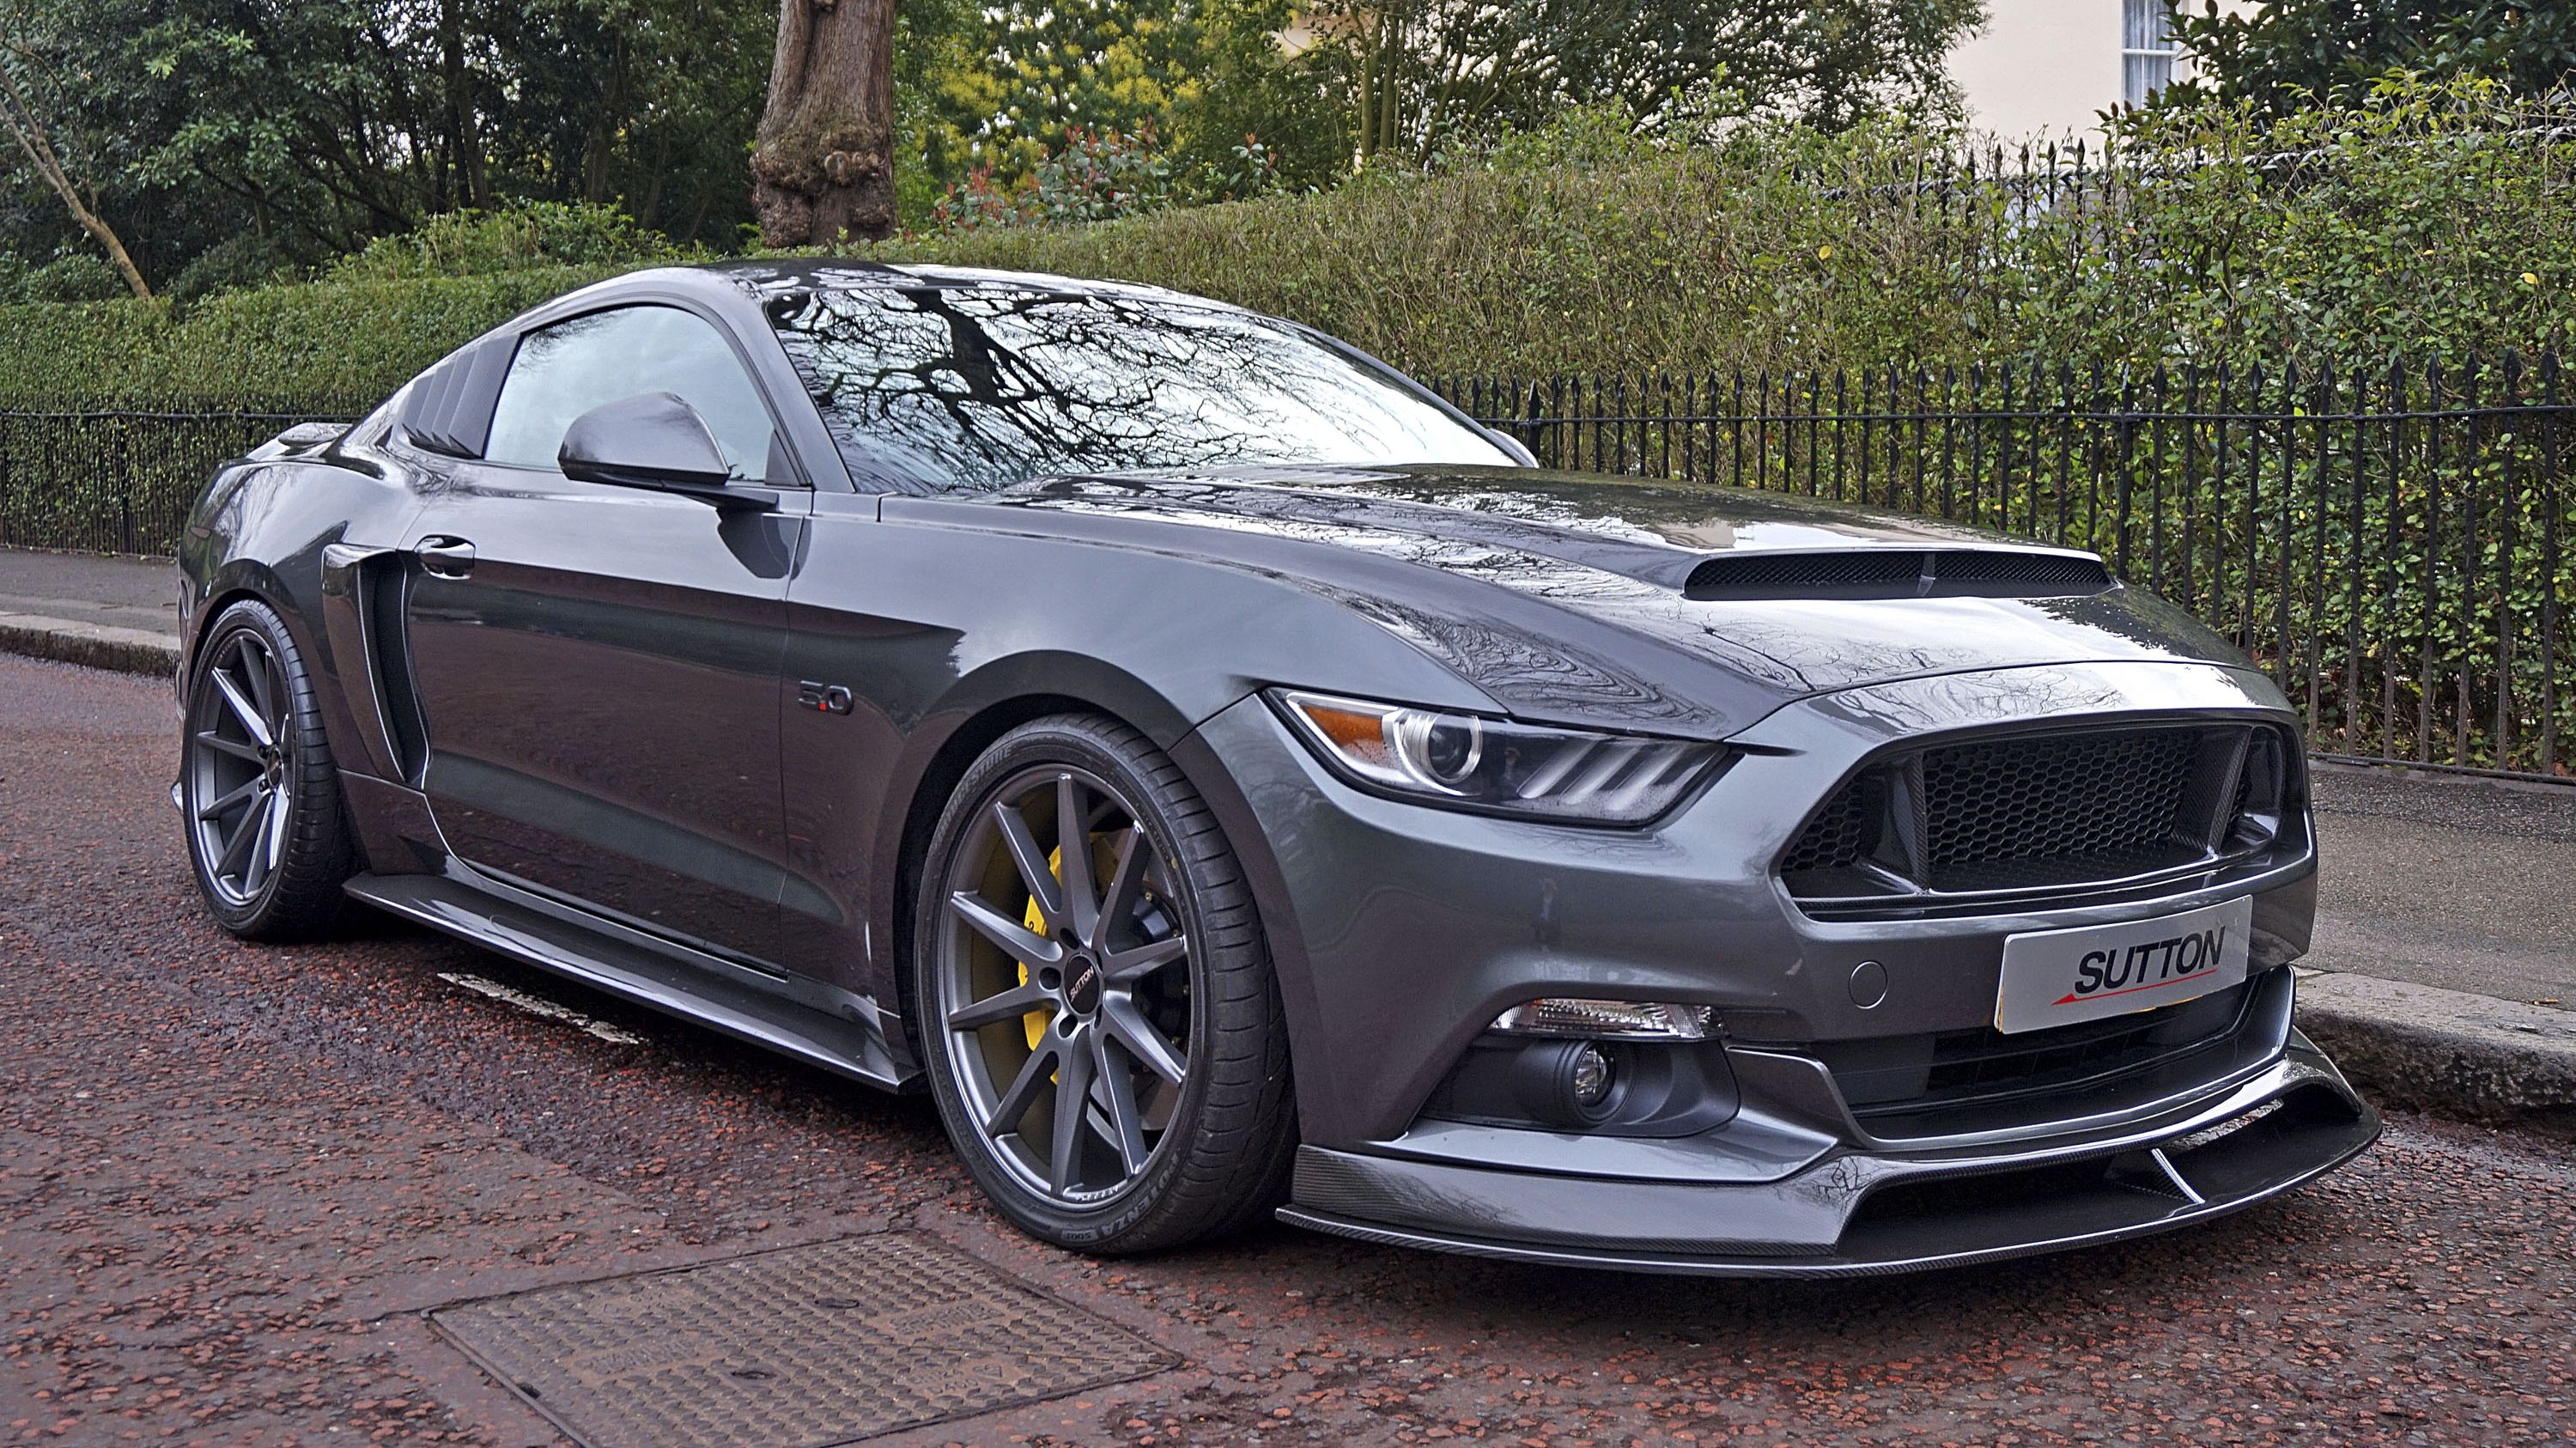 2018 Ford Mustang Sutton CS800 by Sutton Bespoke